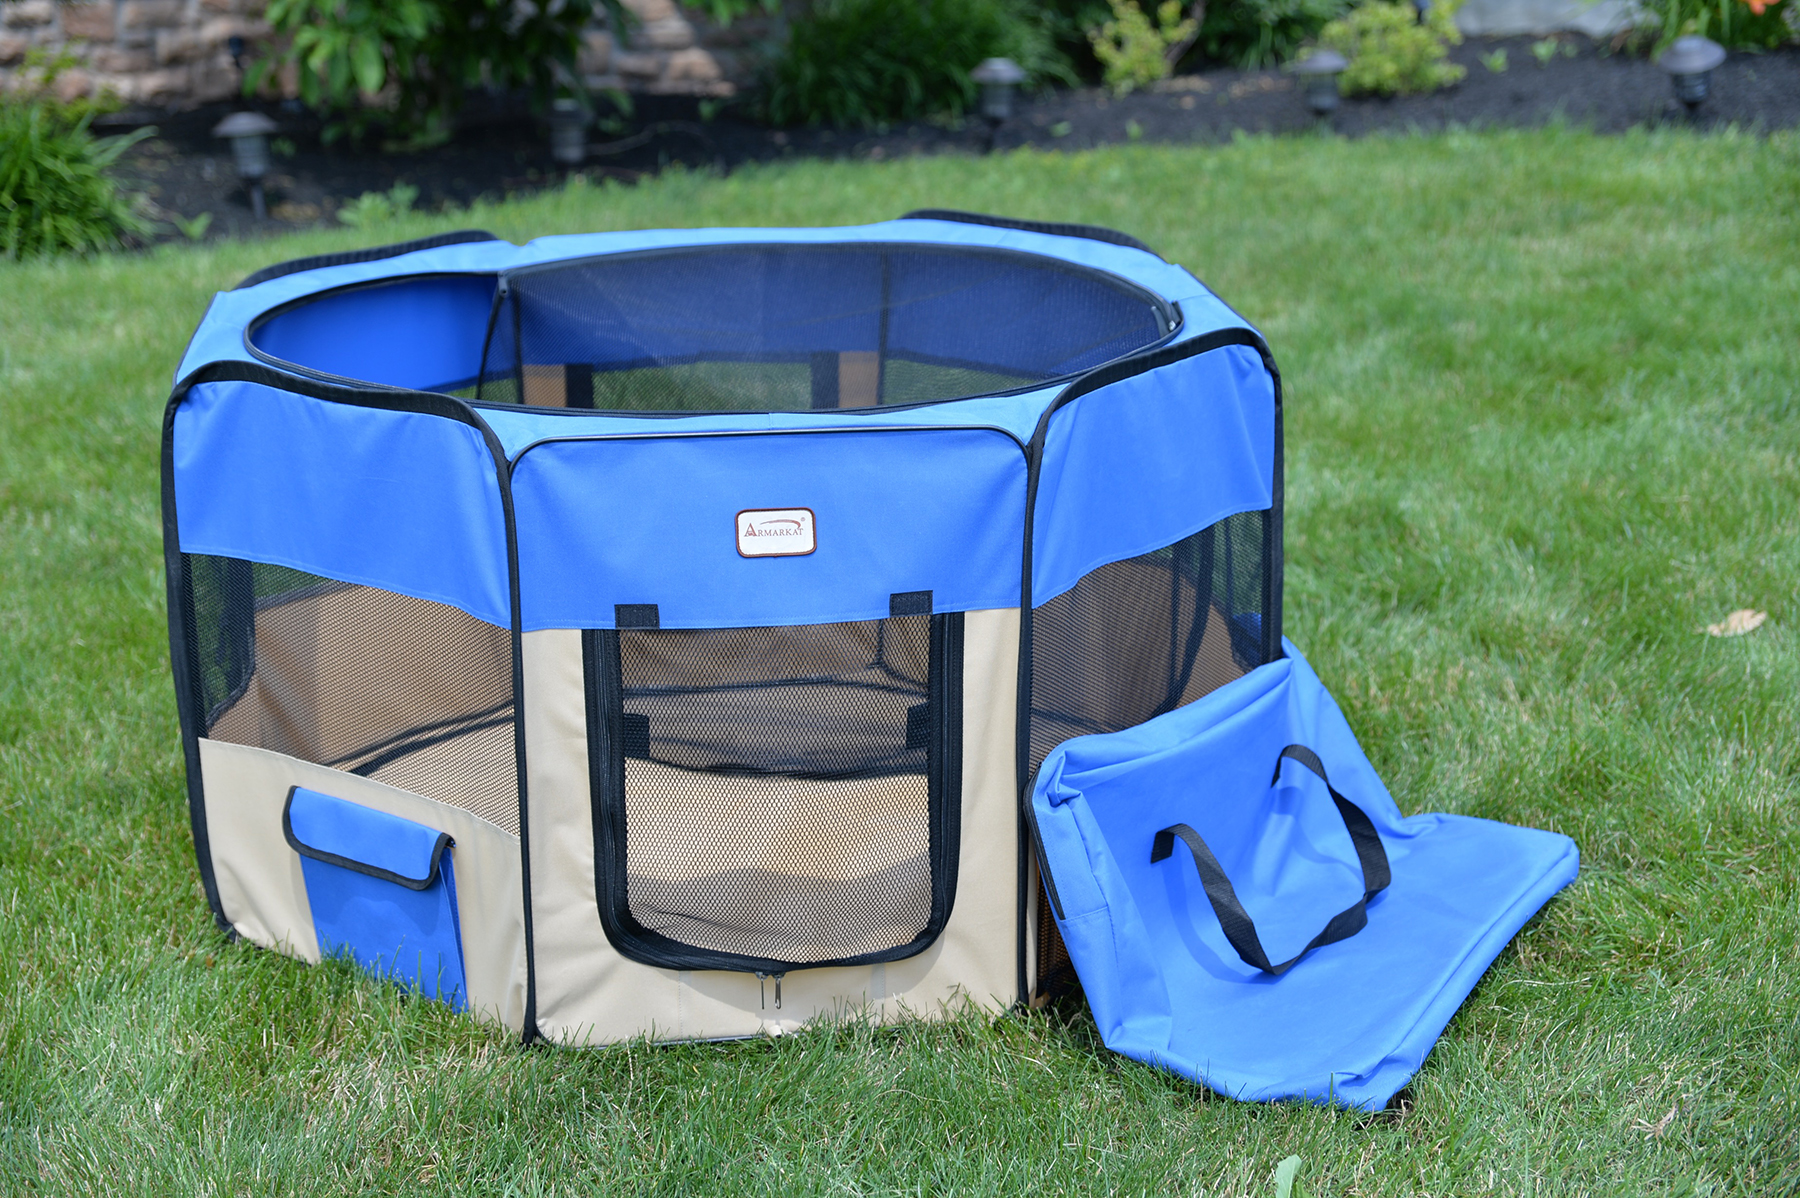 Armarkat Portable Playpen, Blue and Beige, PP001B - image 2 of 2